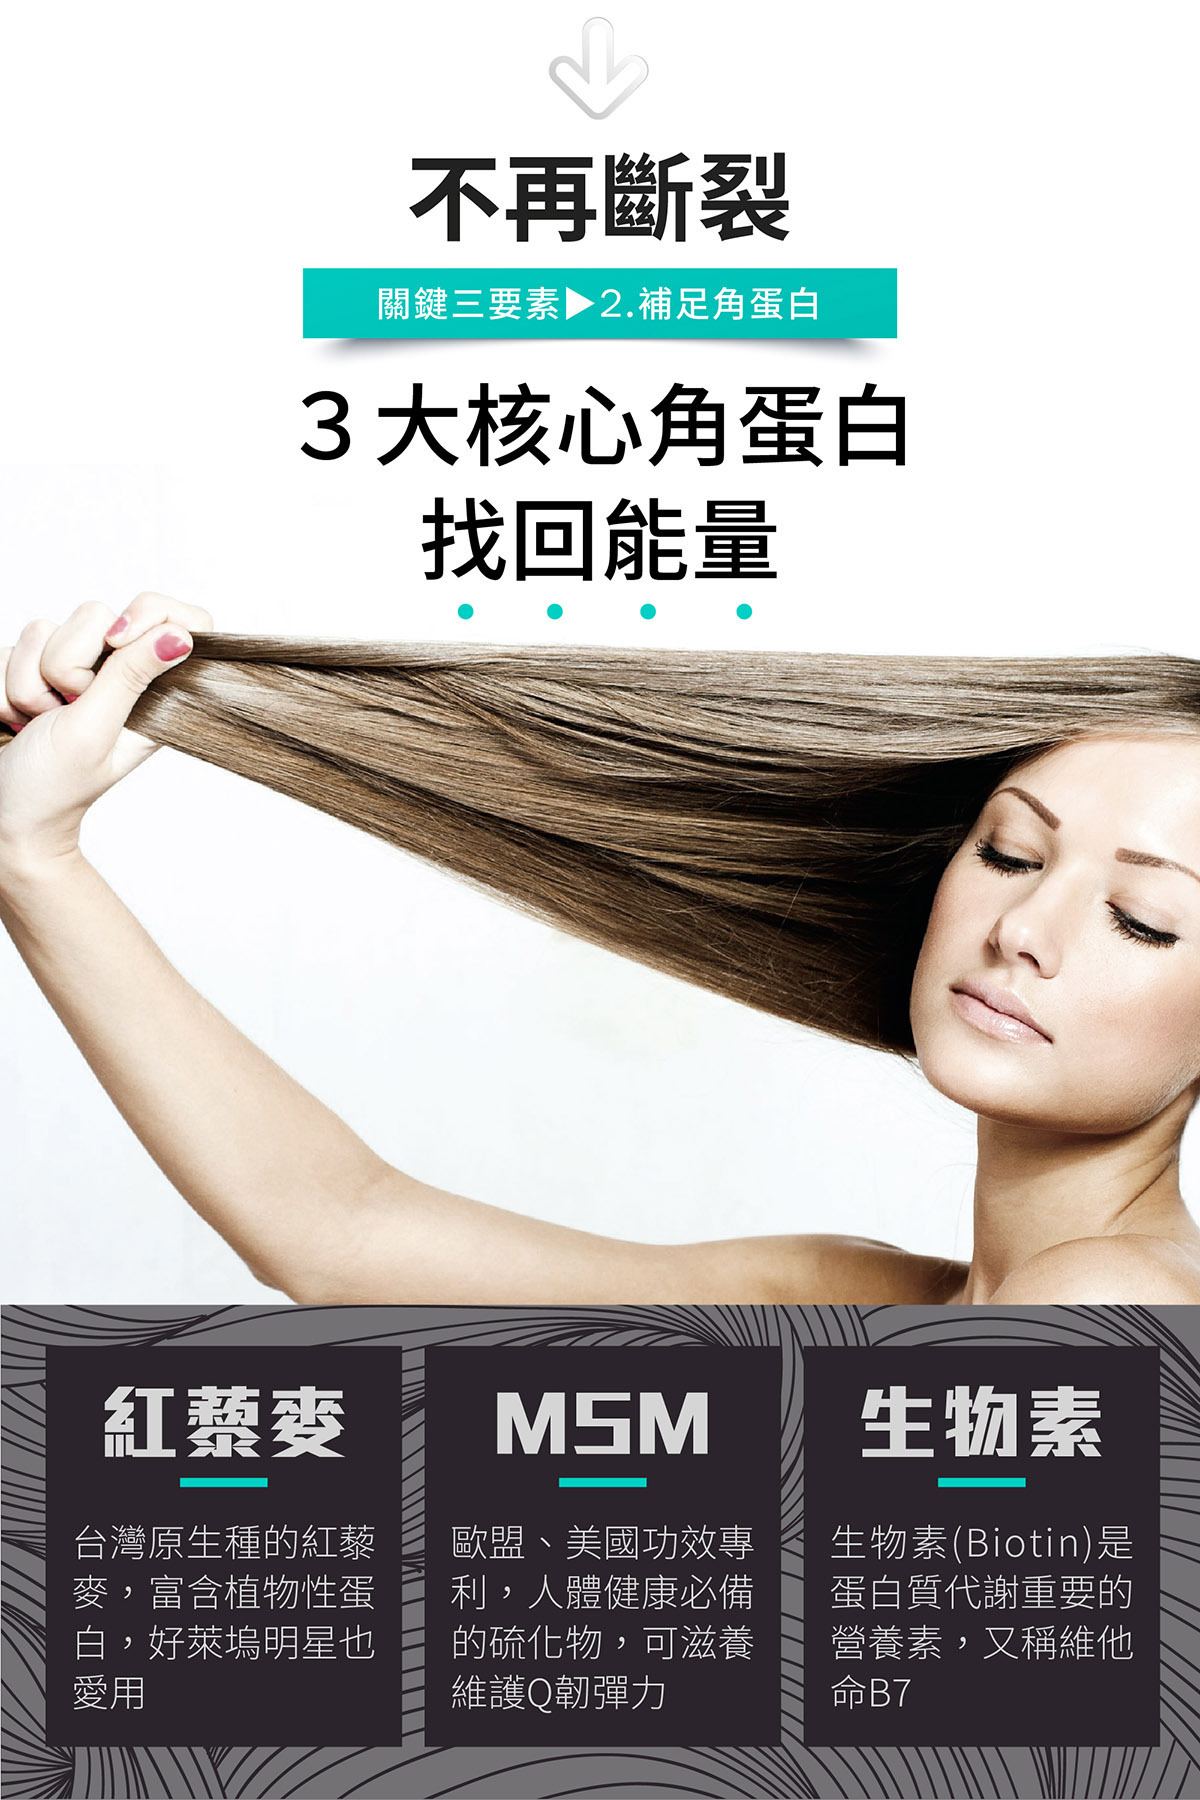 hair growth health food,red quinoa,Biotin,Foxtail Chestnut Extract,Zinc glycinate,Salmon DNA Extract,Horsetail Extract-14